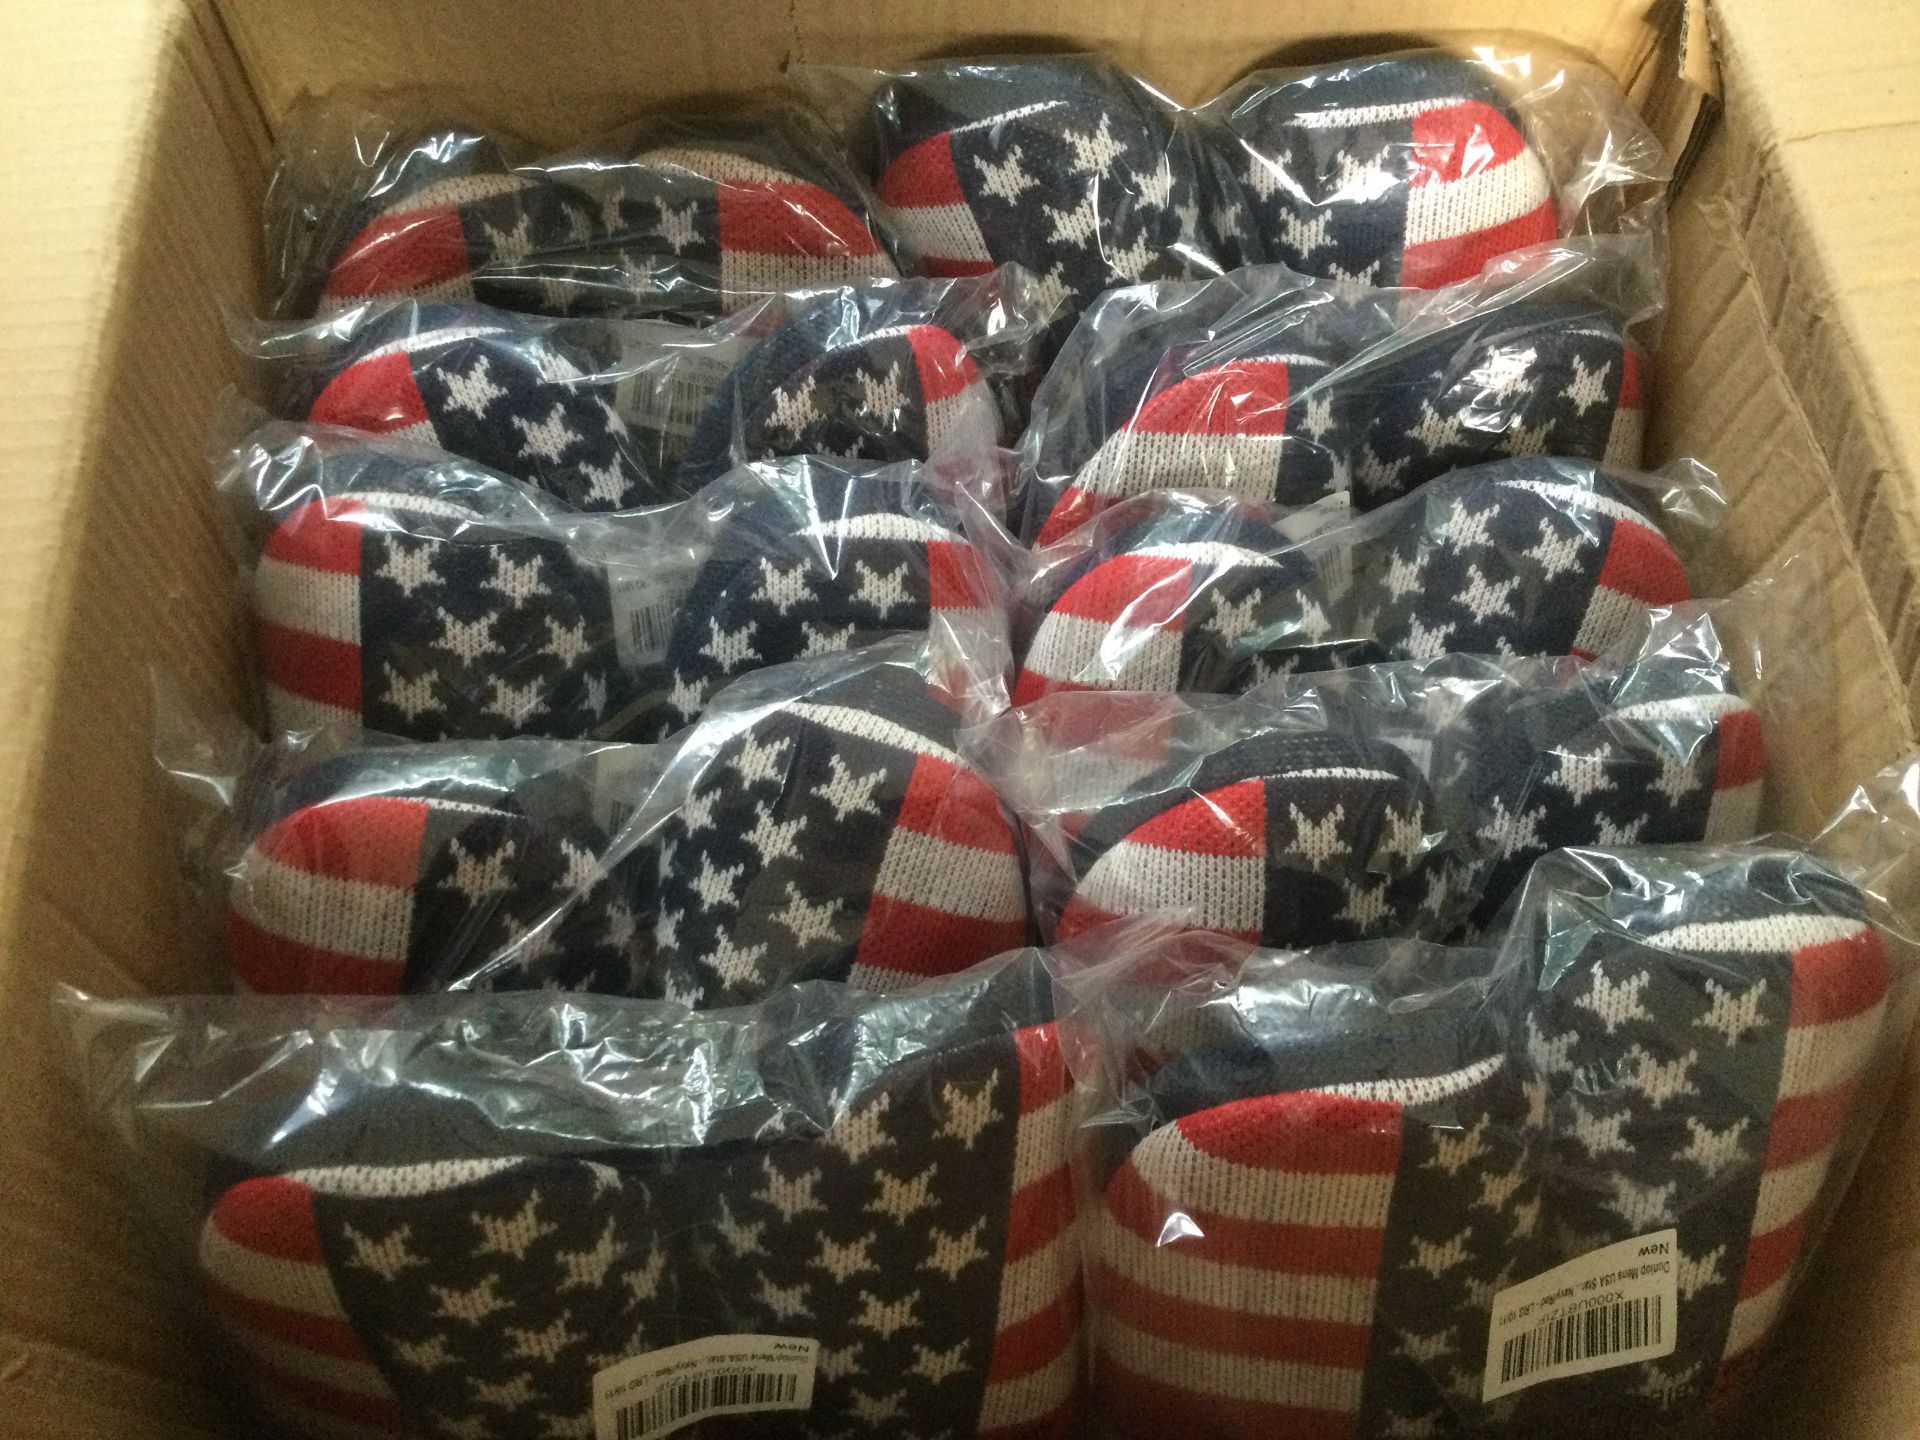 Job Lot 10 x Pairs Men's Dunlop, “USA Stars and Stripes” Memory Foam, Mule Slippers, Size L (10/1... - Image 6 of 7